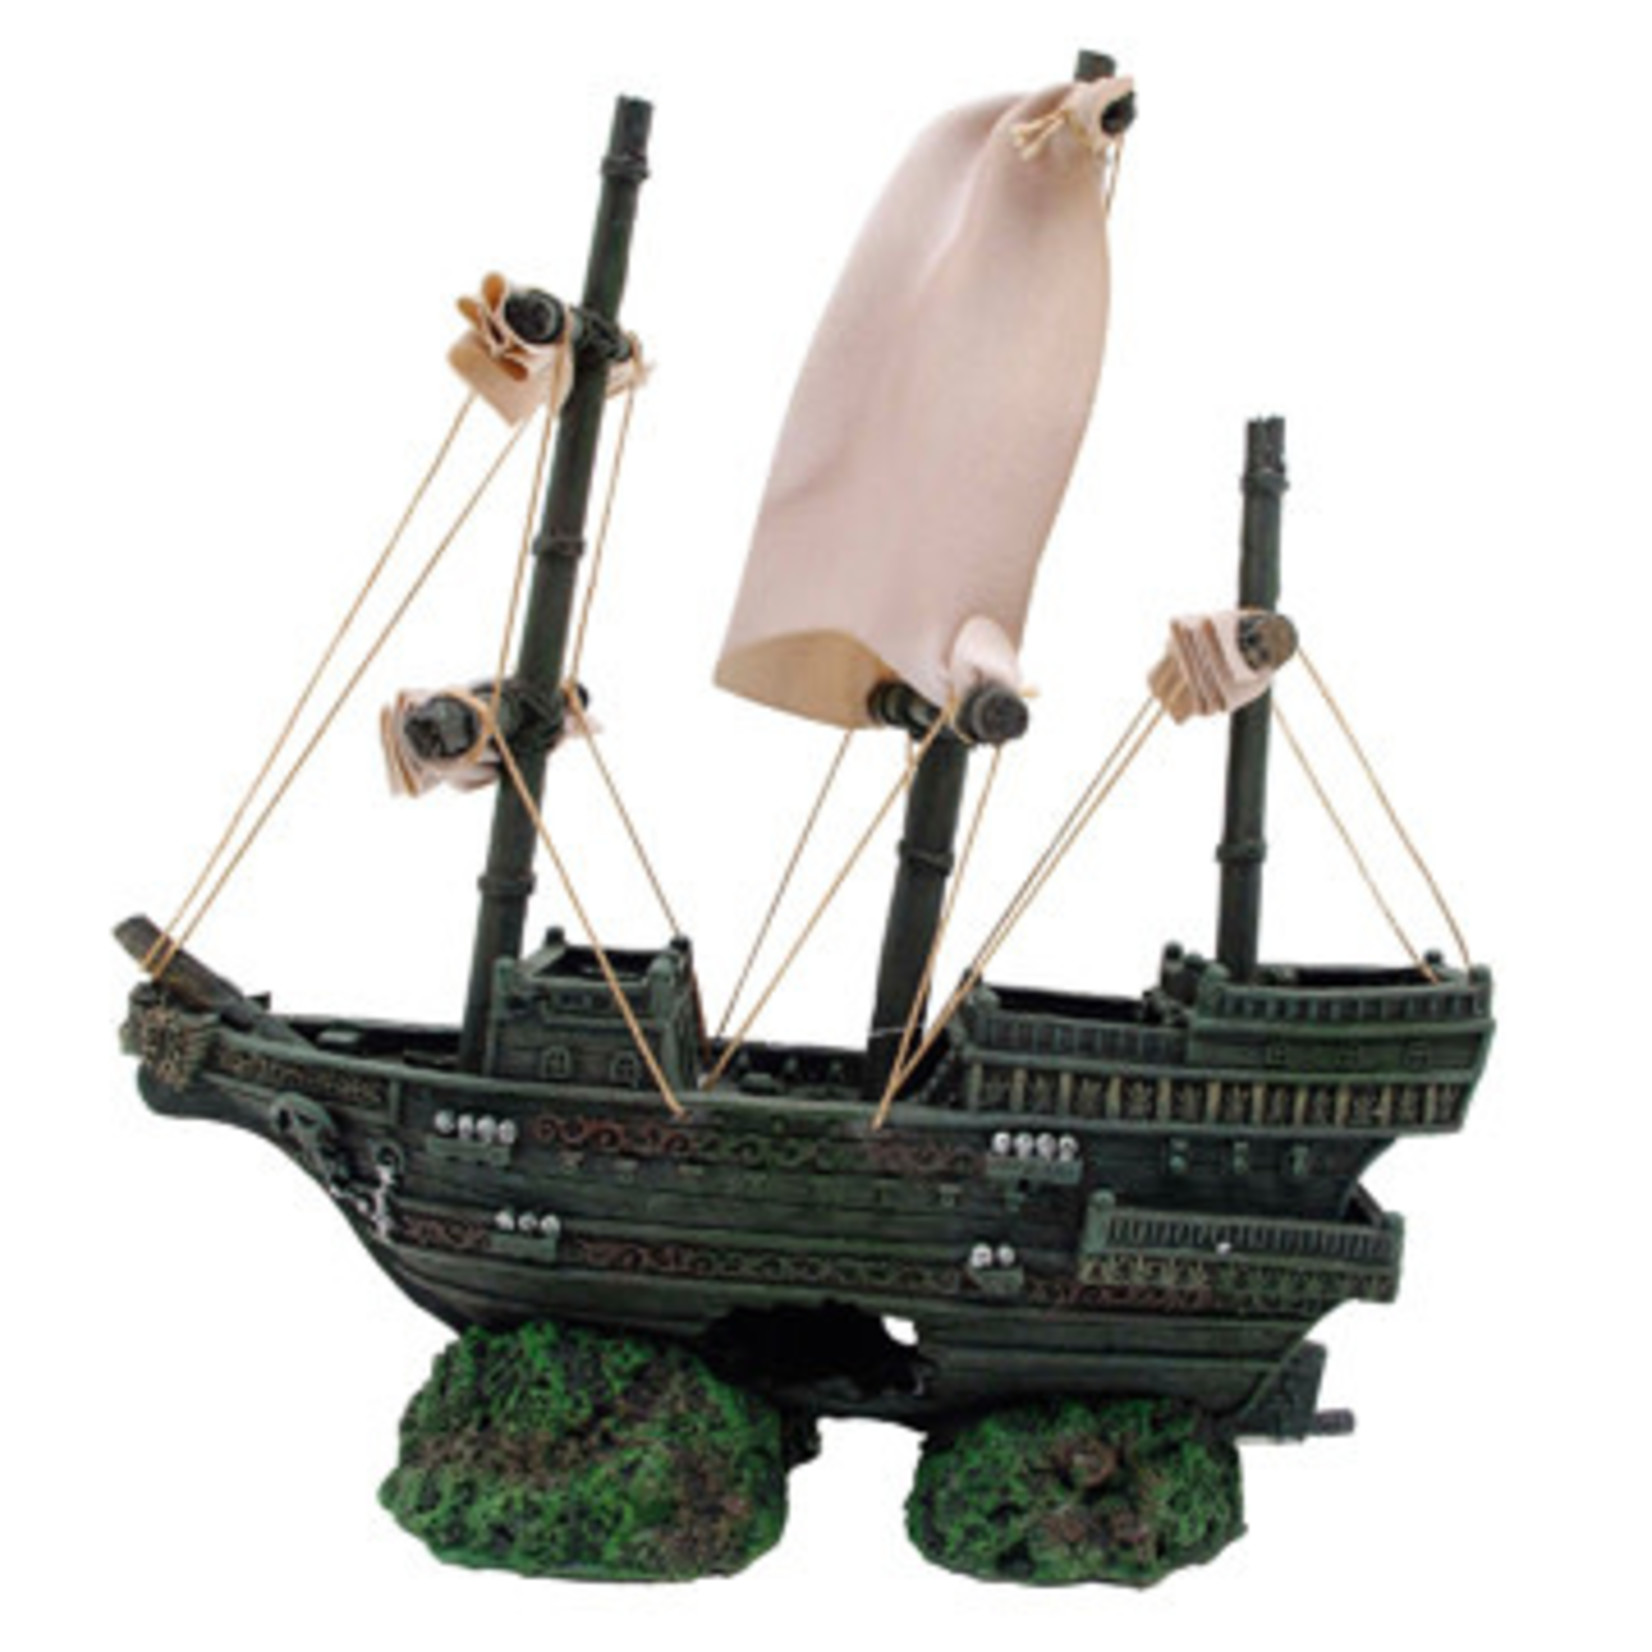 MARINA Marina Sunken Ship with Fabric Sails and Rope 9in x 5.5in x 10.25in (23 x 14 x 26 cm)